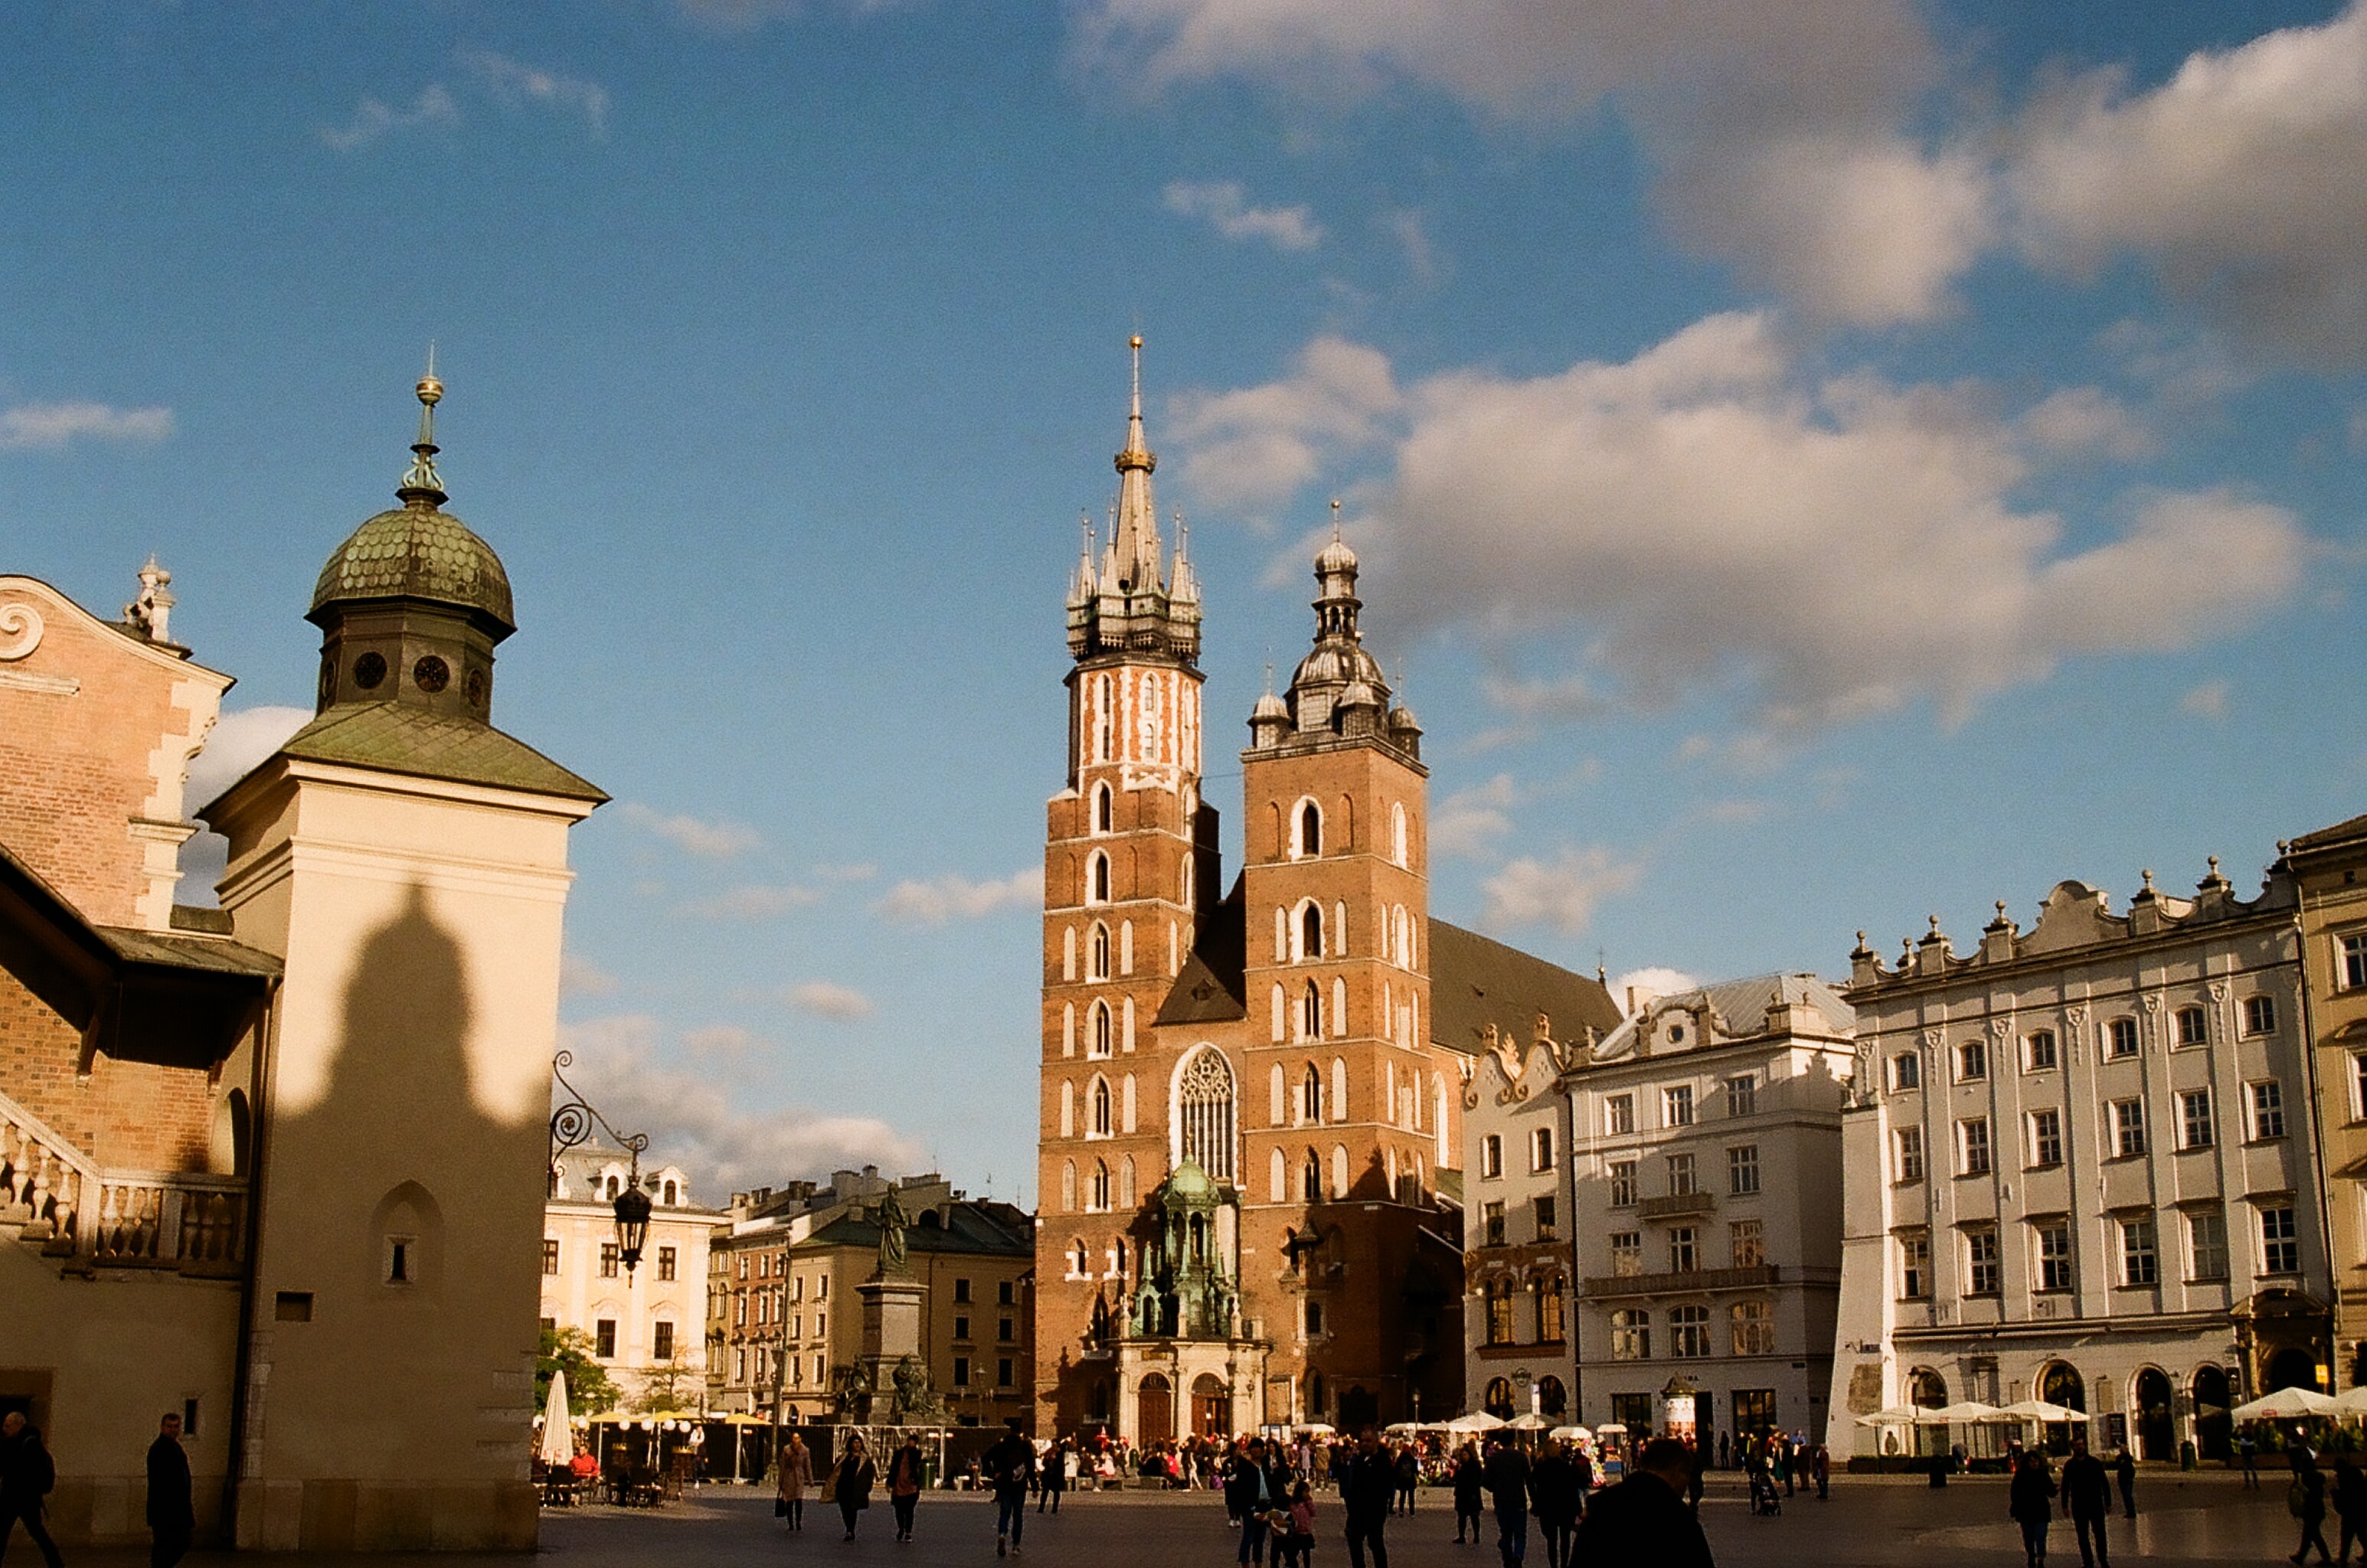 People walking in the Cracow city center